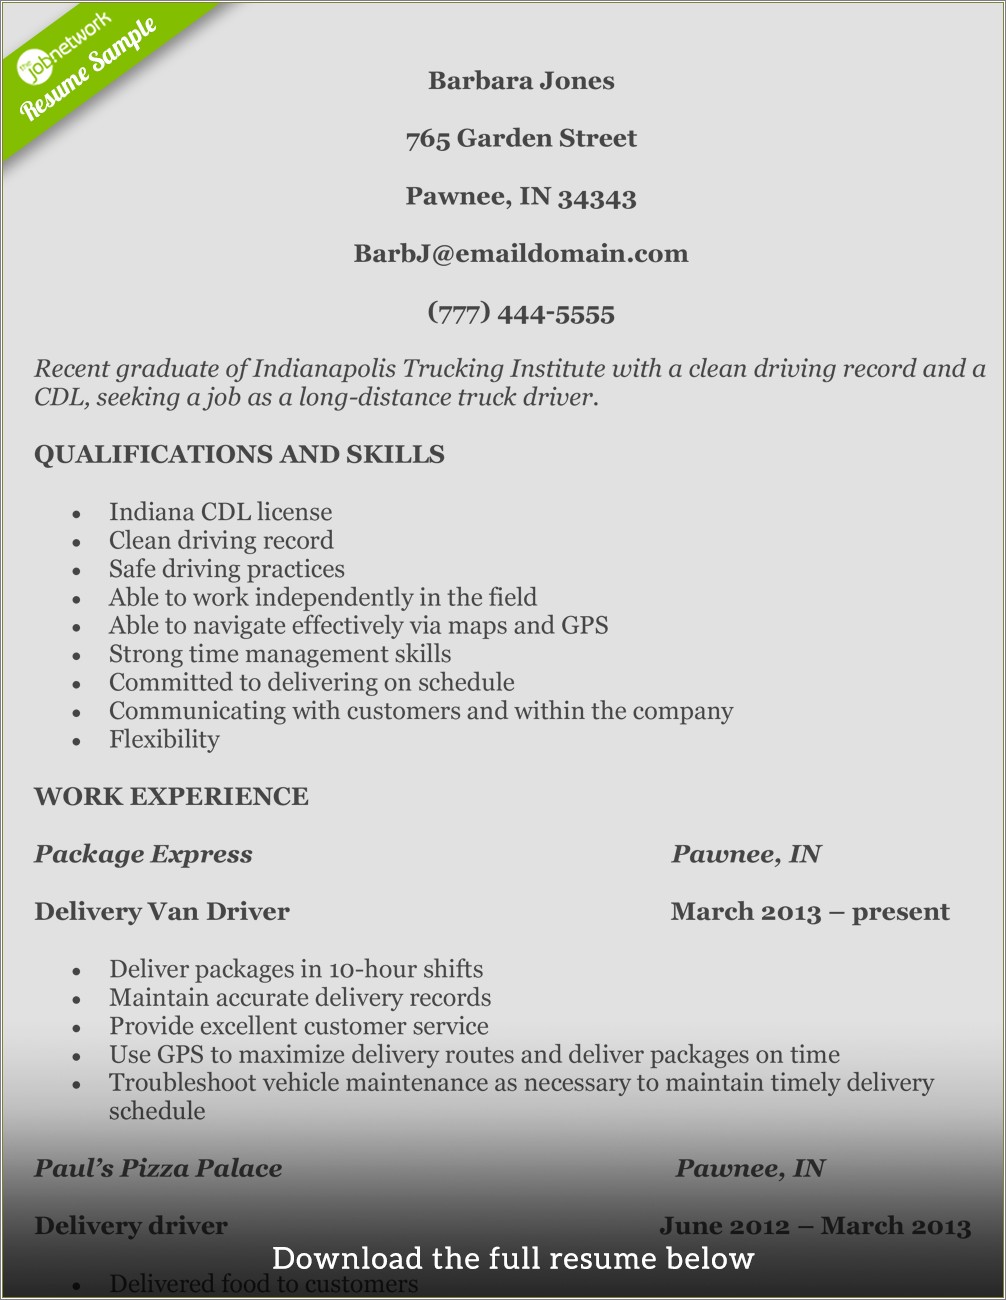 Resume For A Manager In The Tow Industry